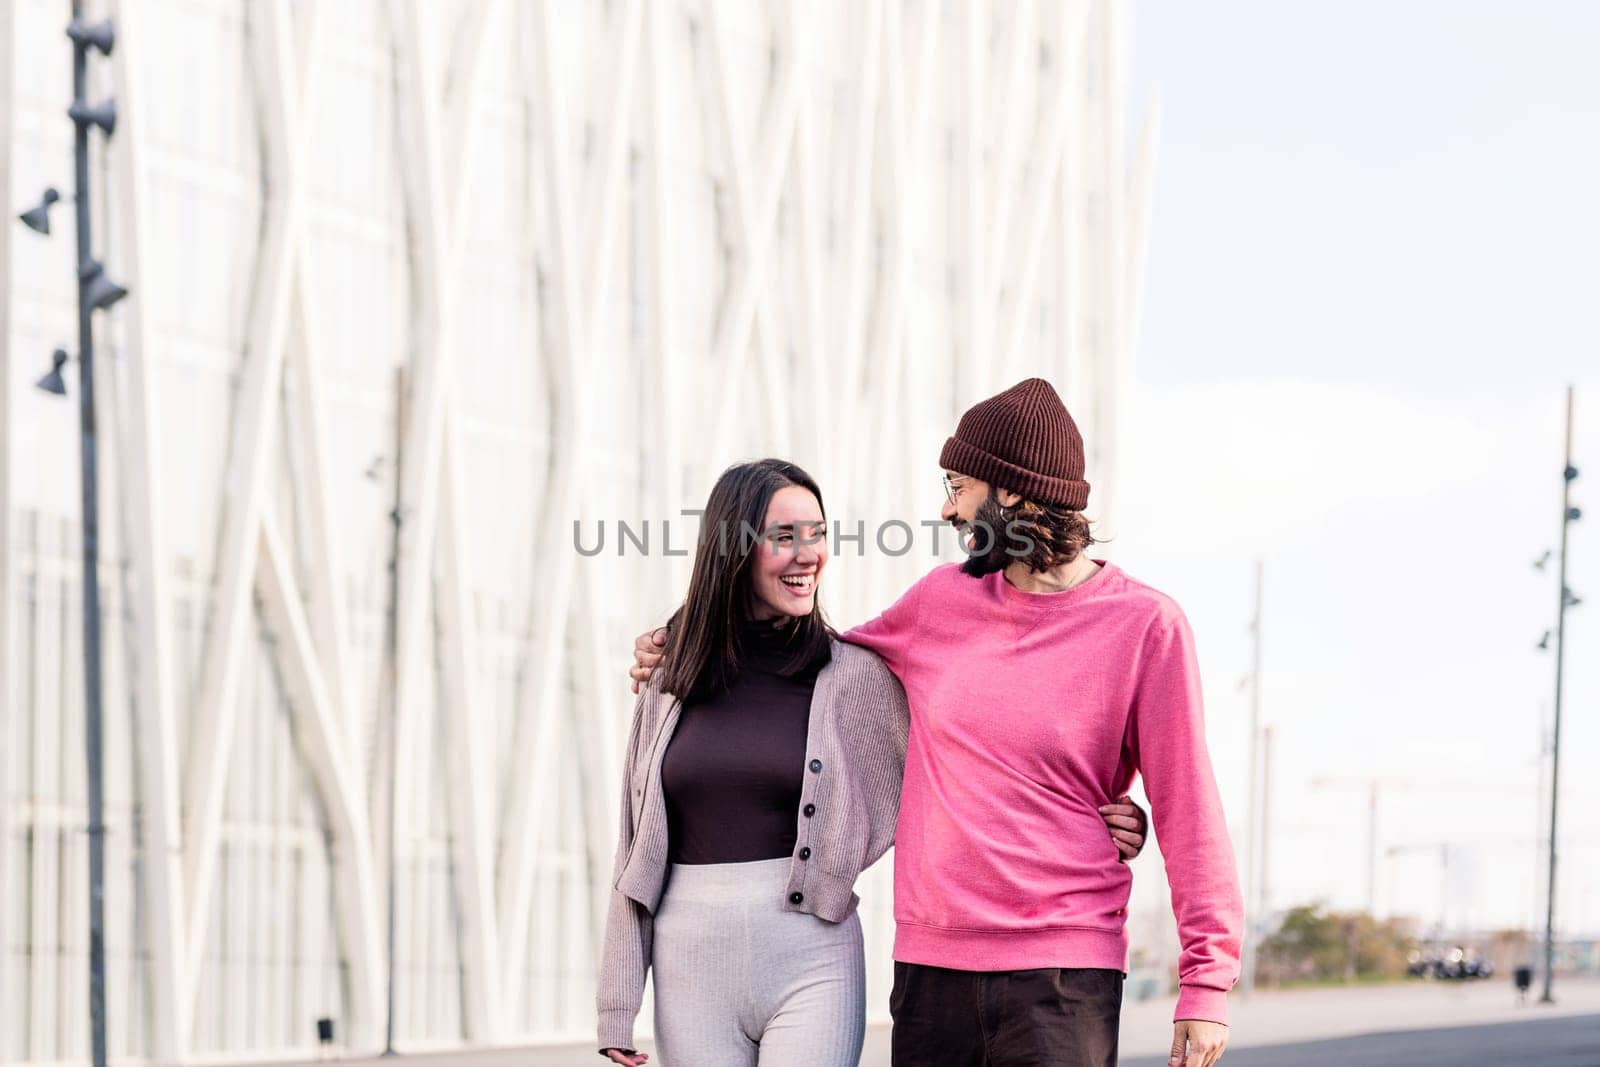 joyful young couple in love sharing a laugh on a romantic walk, concept of friendship and urban lifestyle